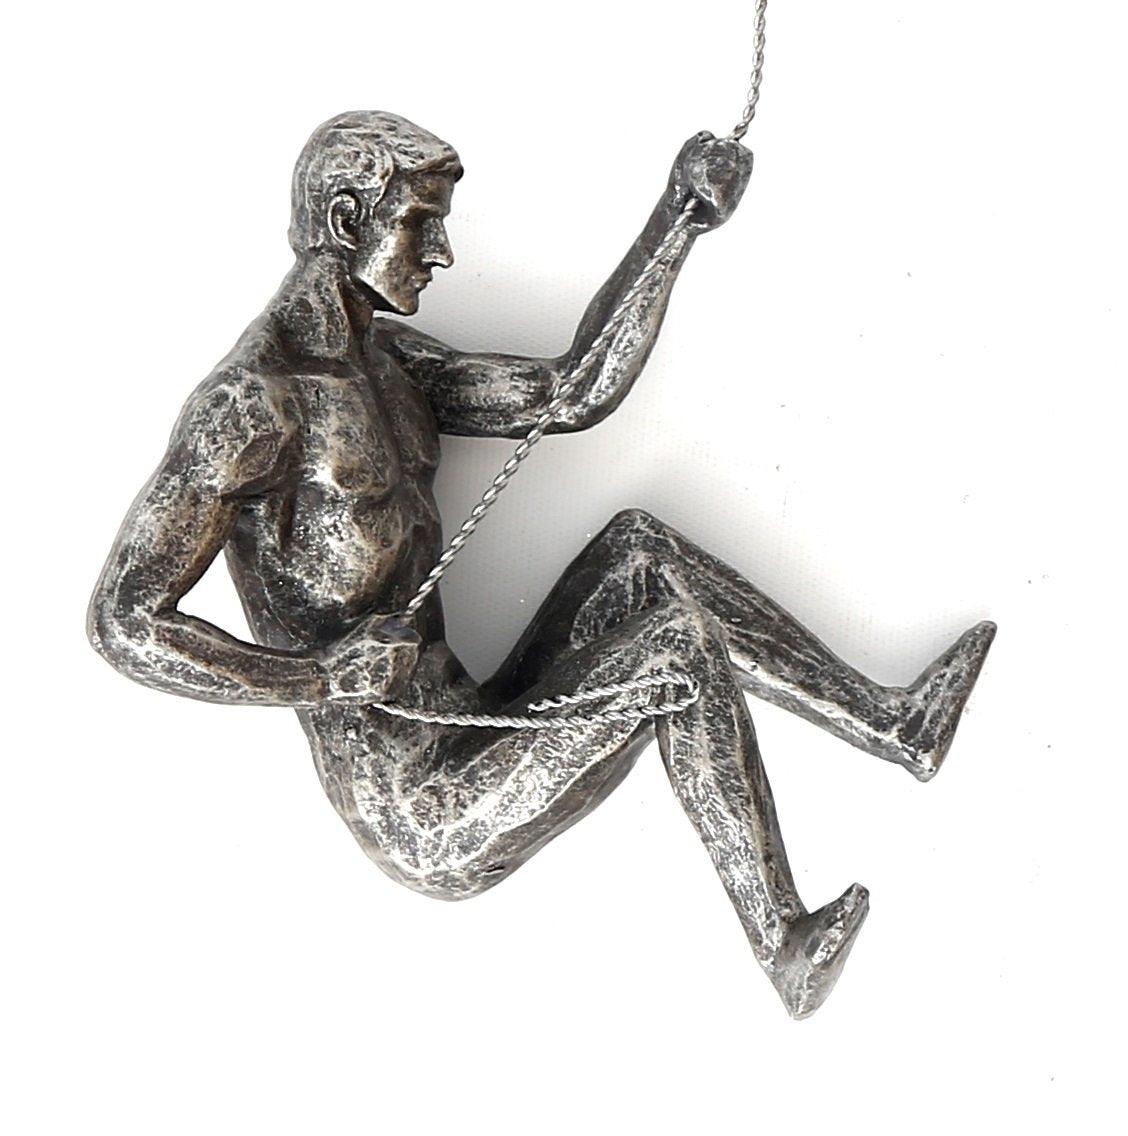 Silver Abseiling Man Looking Down 73cm - £38.99 - Figurines & Statues 